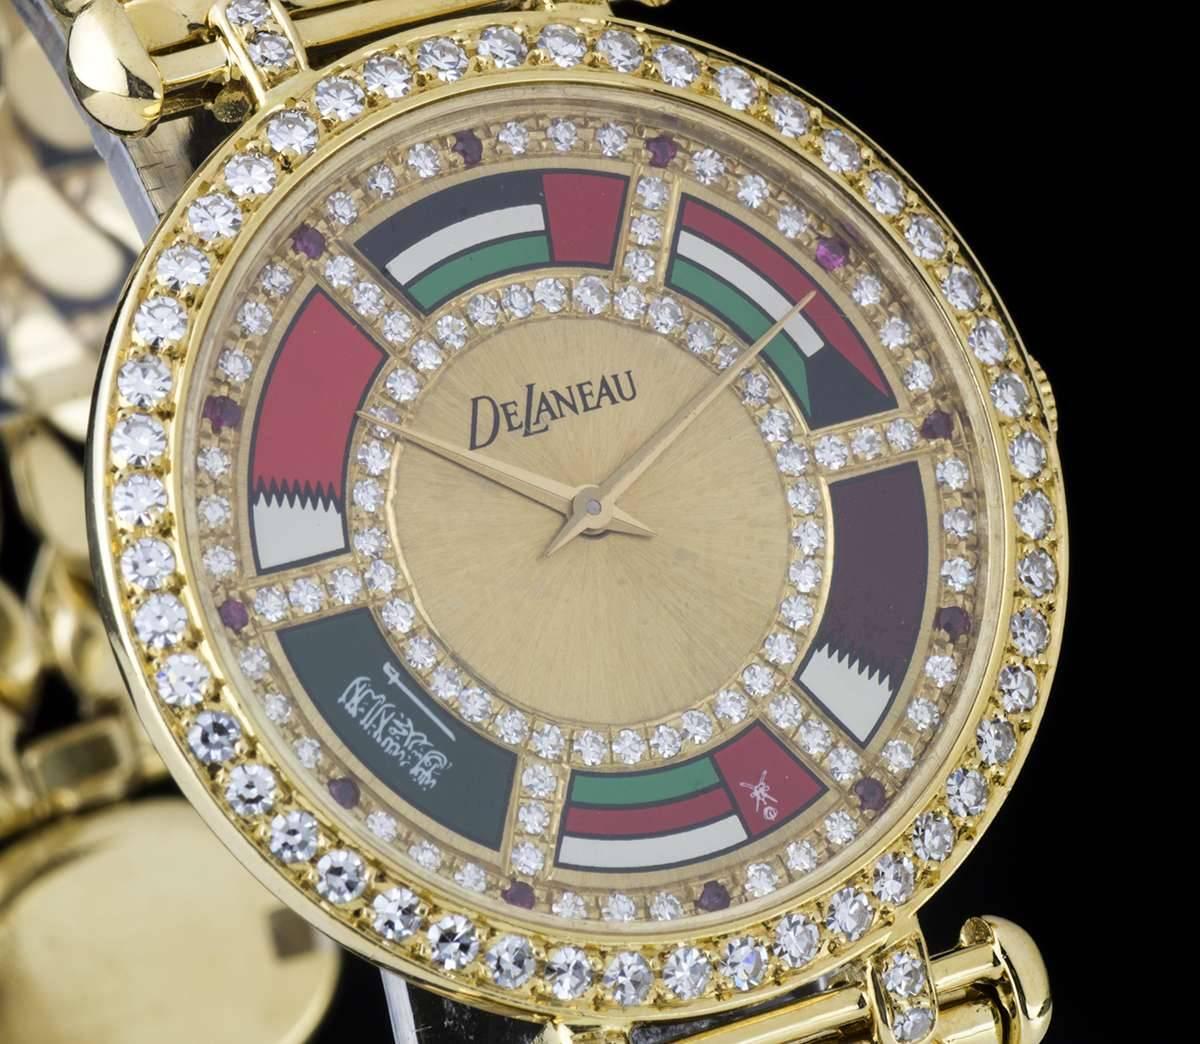 A Gold Middle Eastern Flags Gents Dress Wristwatch, champagne dial set with approximately 90 round brilliant cut diamonds and 12 round brilliant cut ruby hour markers, United Arab Emirates flag between 11 and 1 0'clock, Kuwait flag between 1 and 3